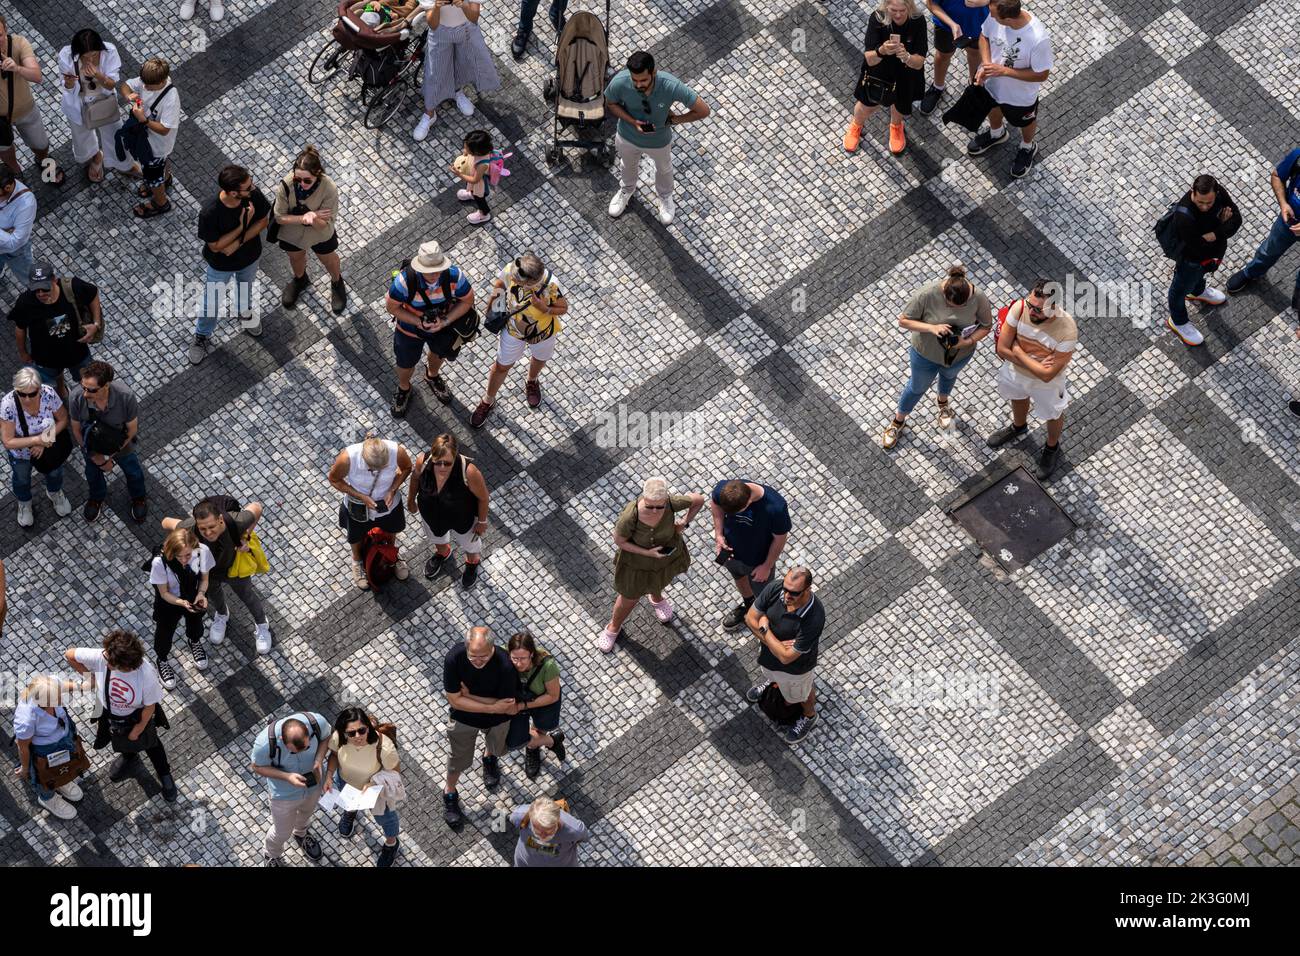 Prague, Czech Republic - 5 September 2022: Large and diverse group of people seen from above Stock Photo